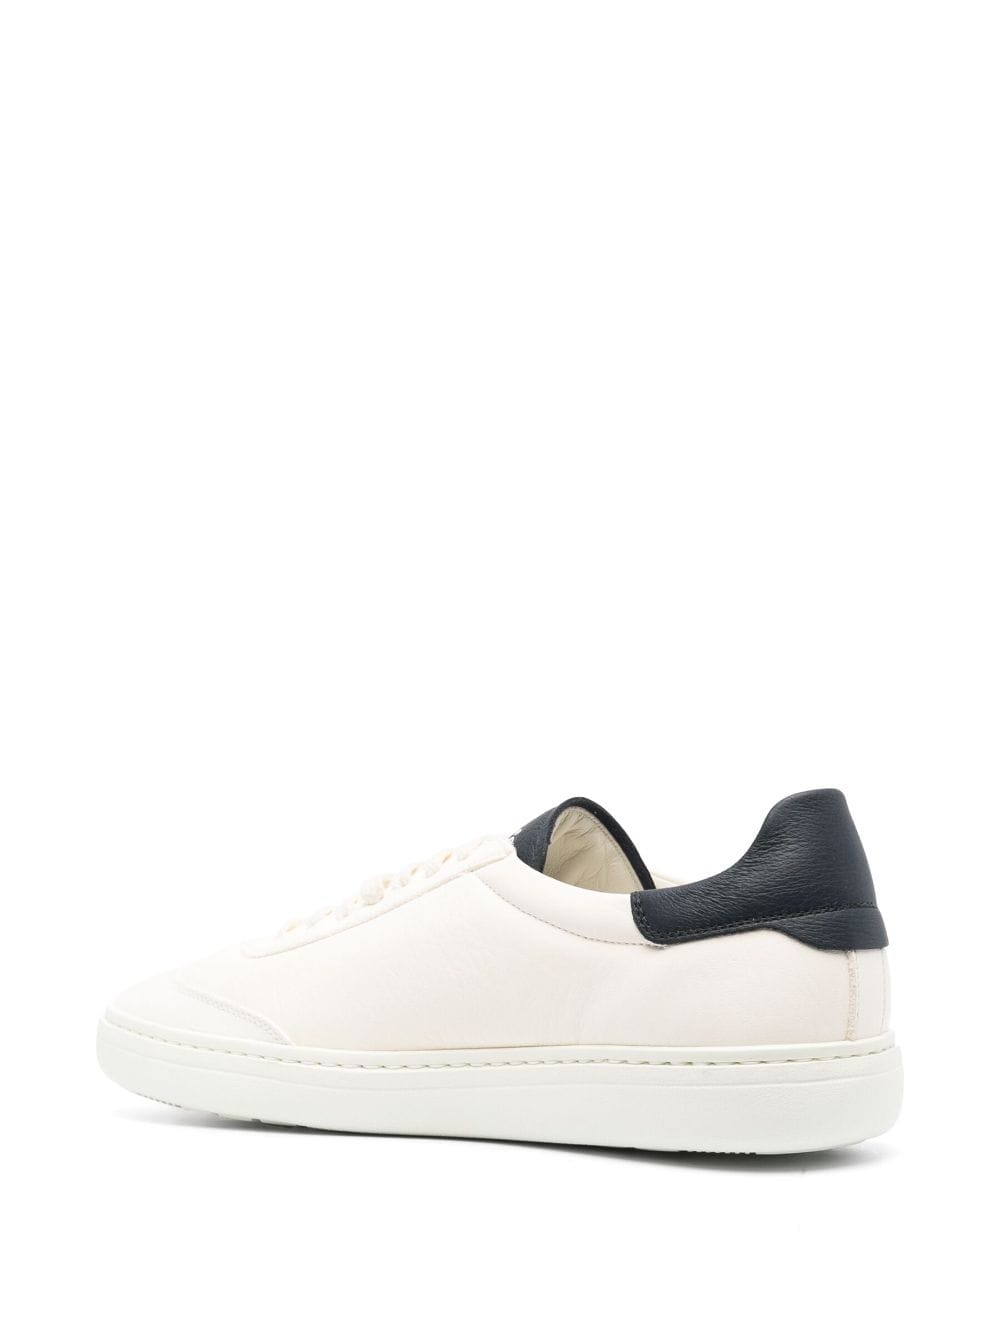 CHURCH'S Timeless Luxury Leather Sneakers for Men - Ivory White and Navy Blue